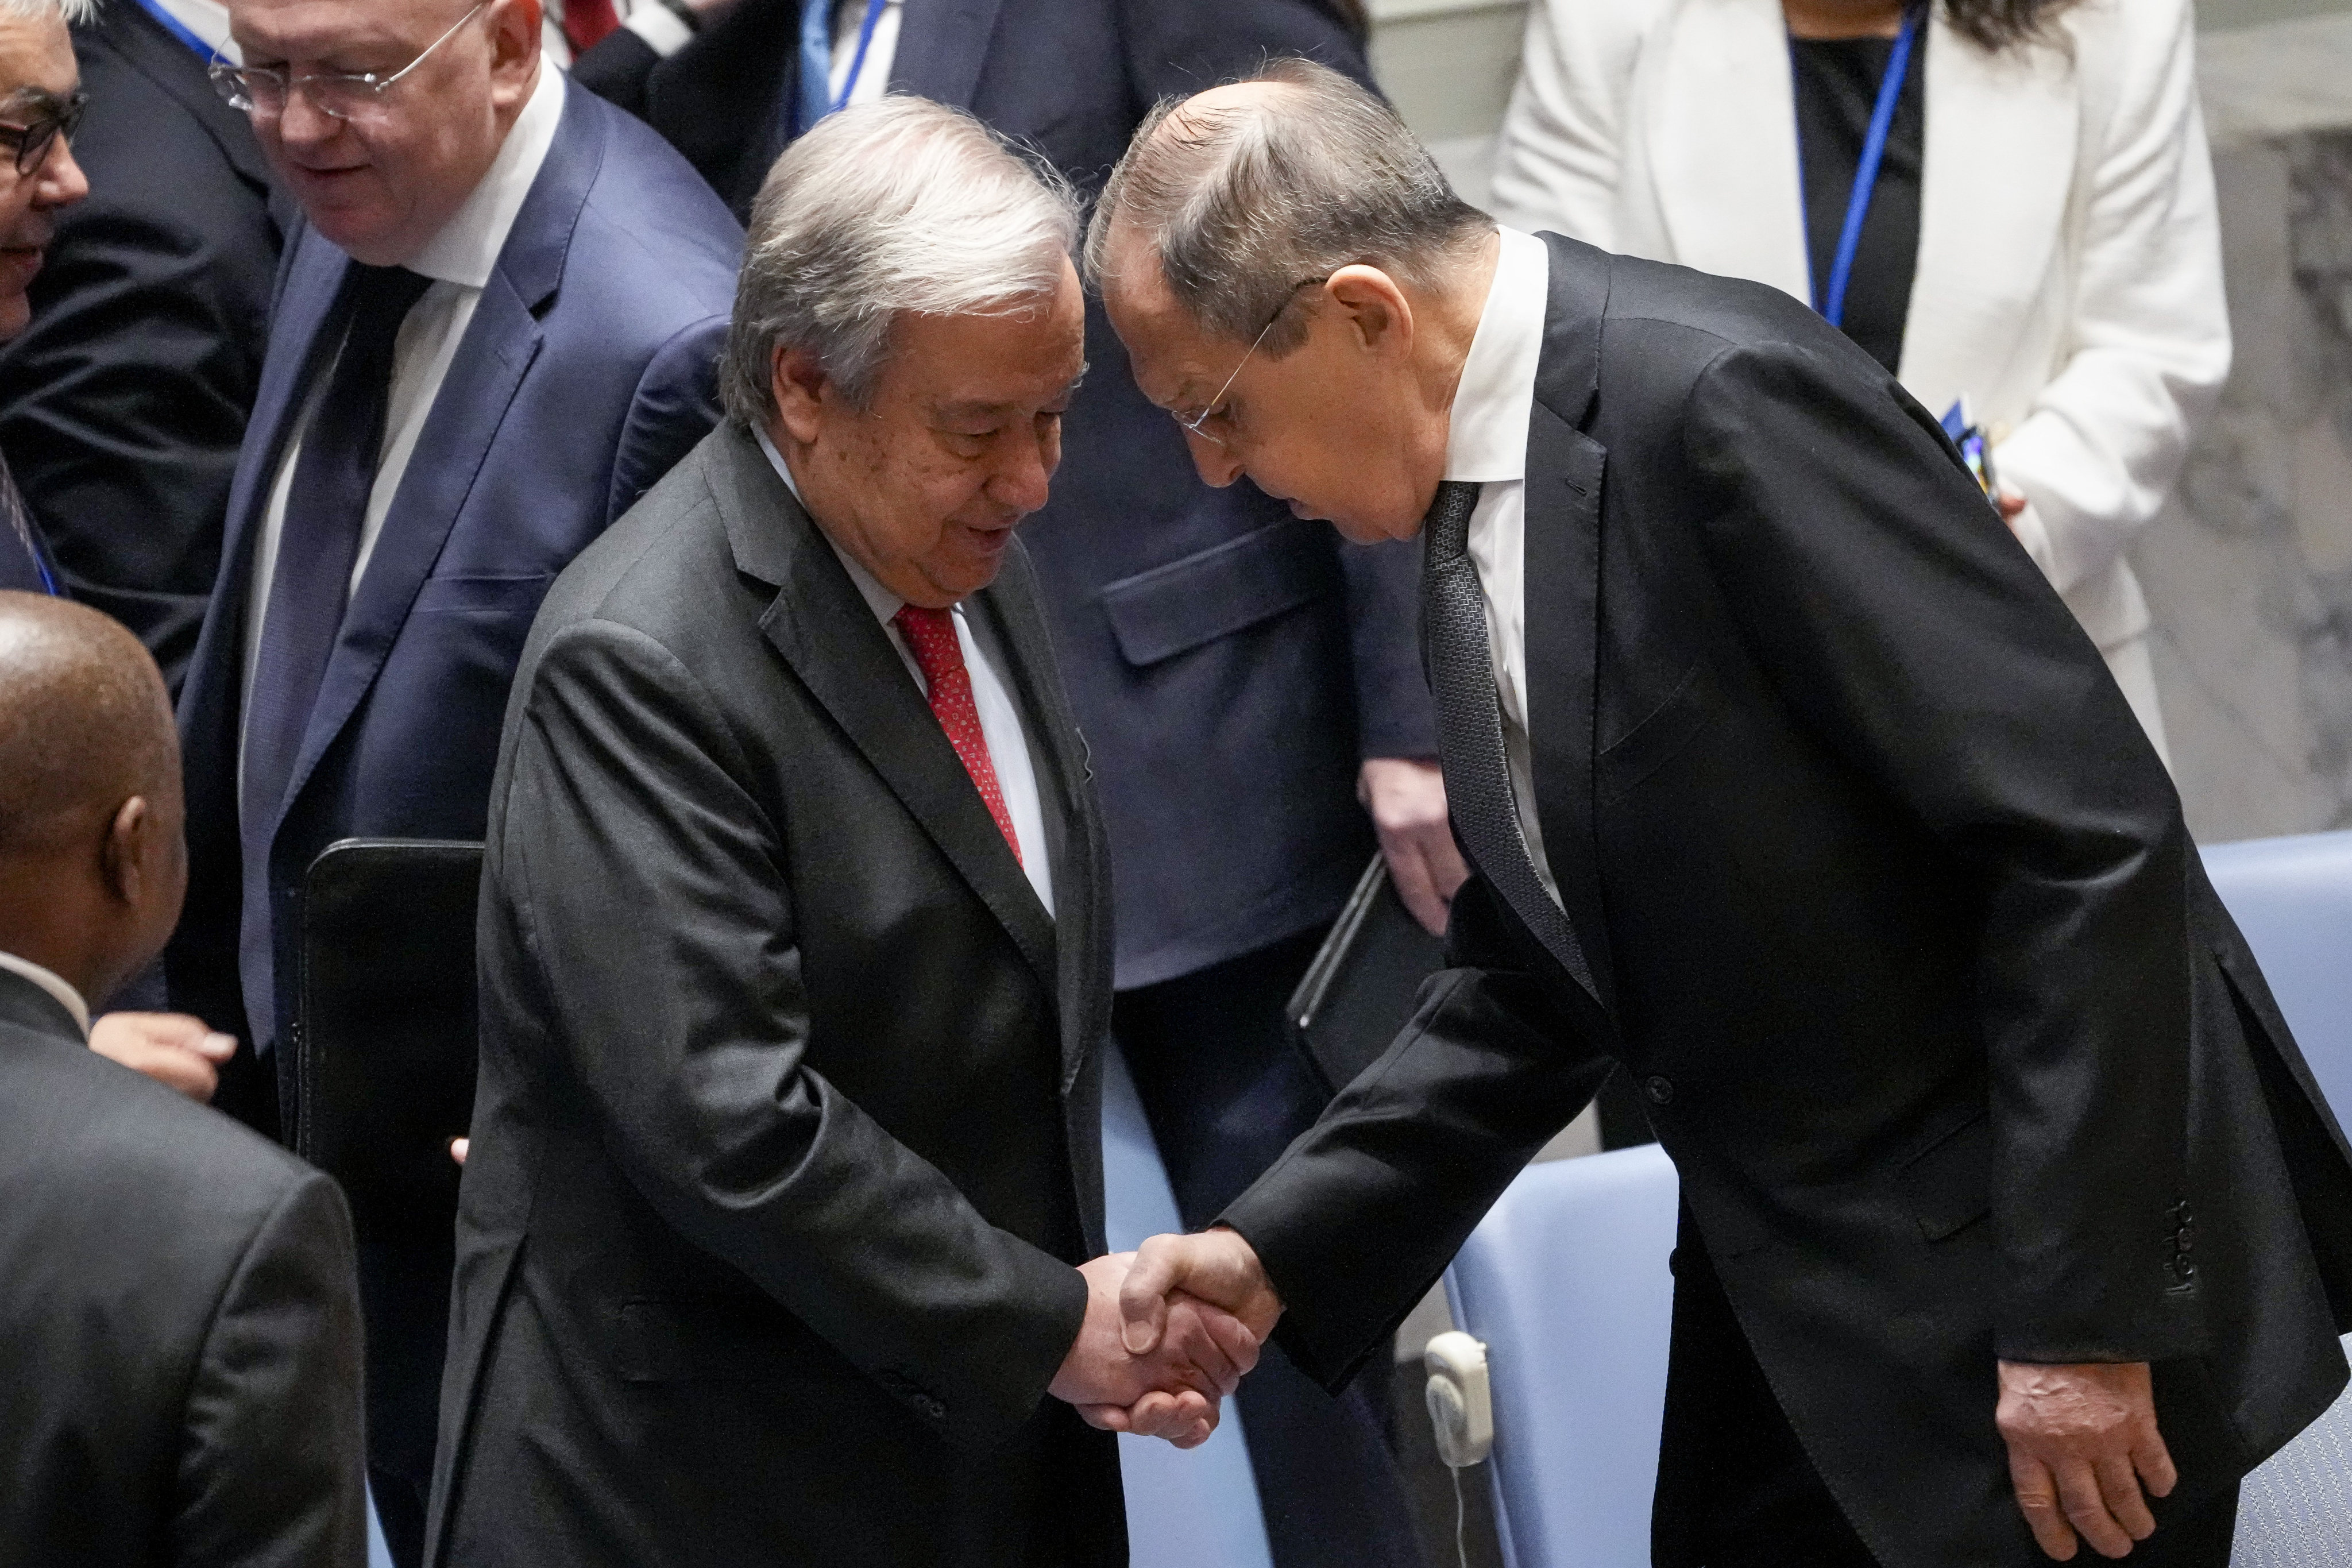 United Nations Secretary General Antonio Guterres (left) and Russia’s Foreign Minister Sergey Lavrov shake hands before a meeting of the UN Security Council on Monday. Photo: AP